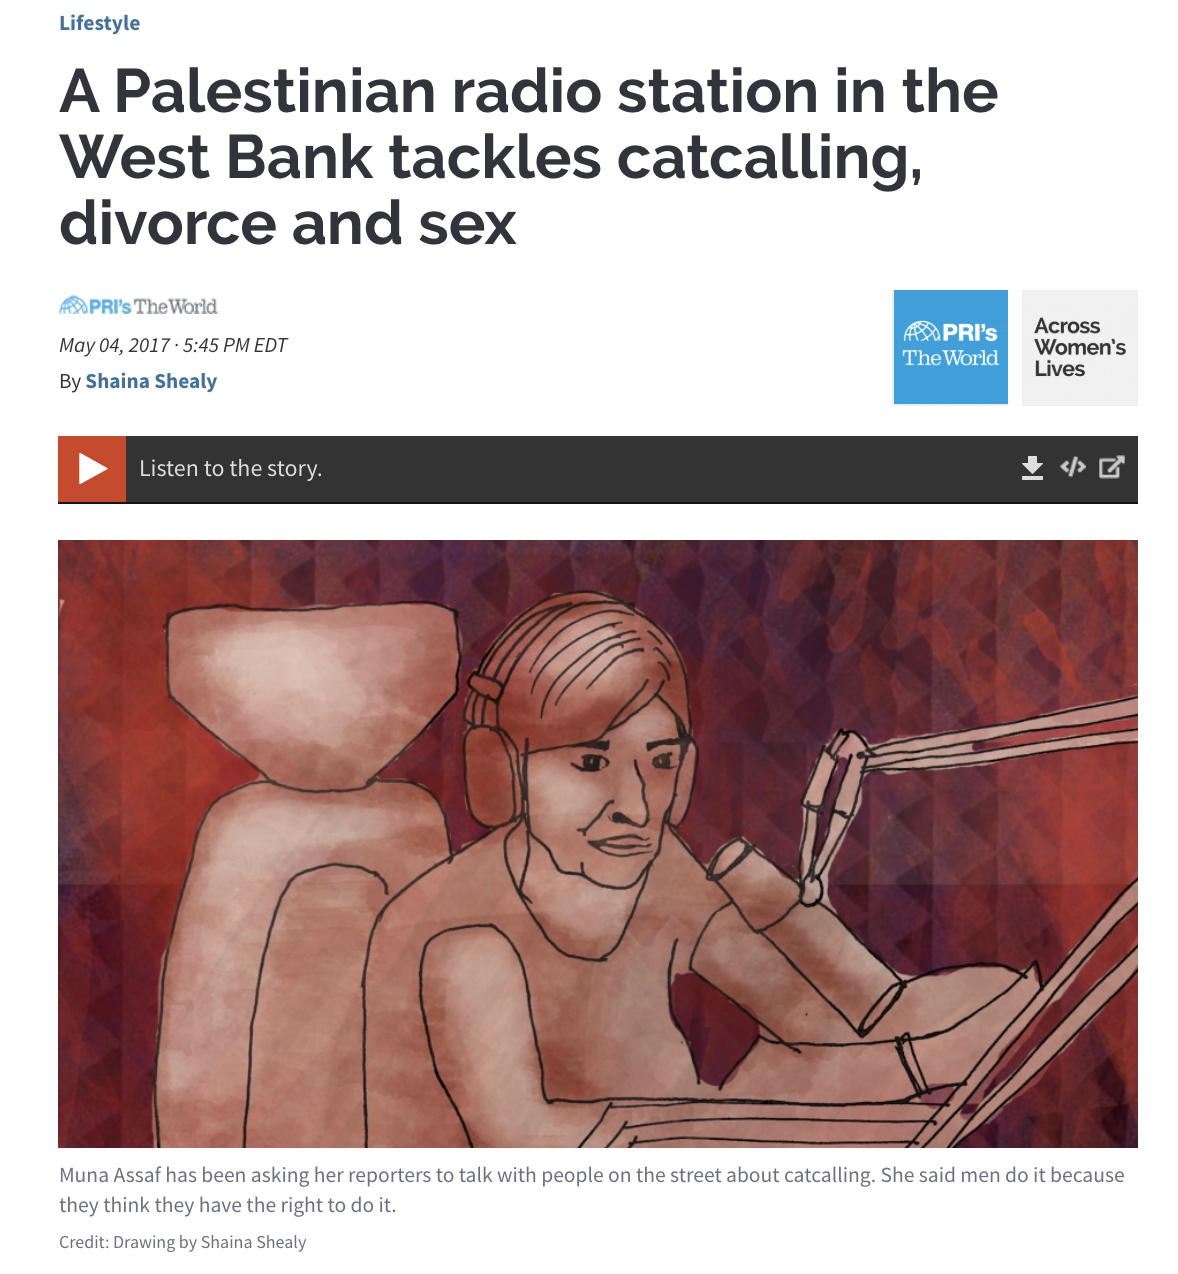 Palestinian radio station tackles cat calling, divorce and sex